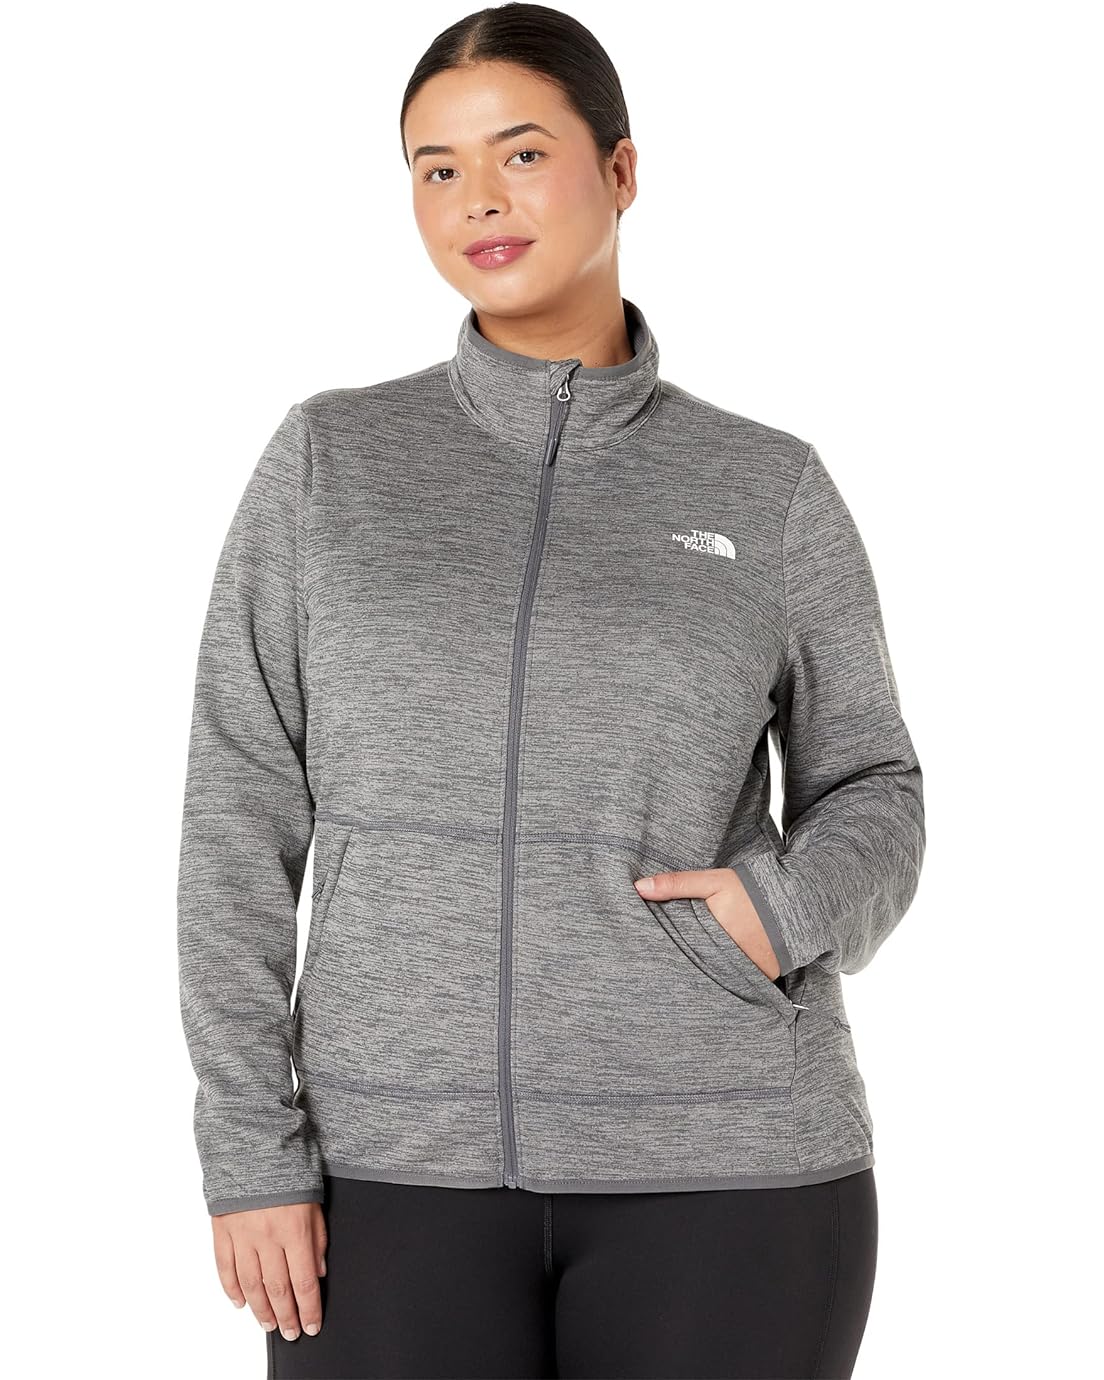 The North Face Plus Size Canyonlands Full Zip